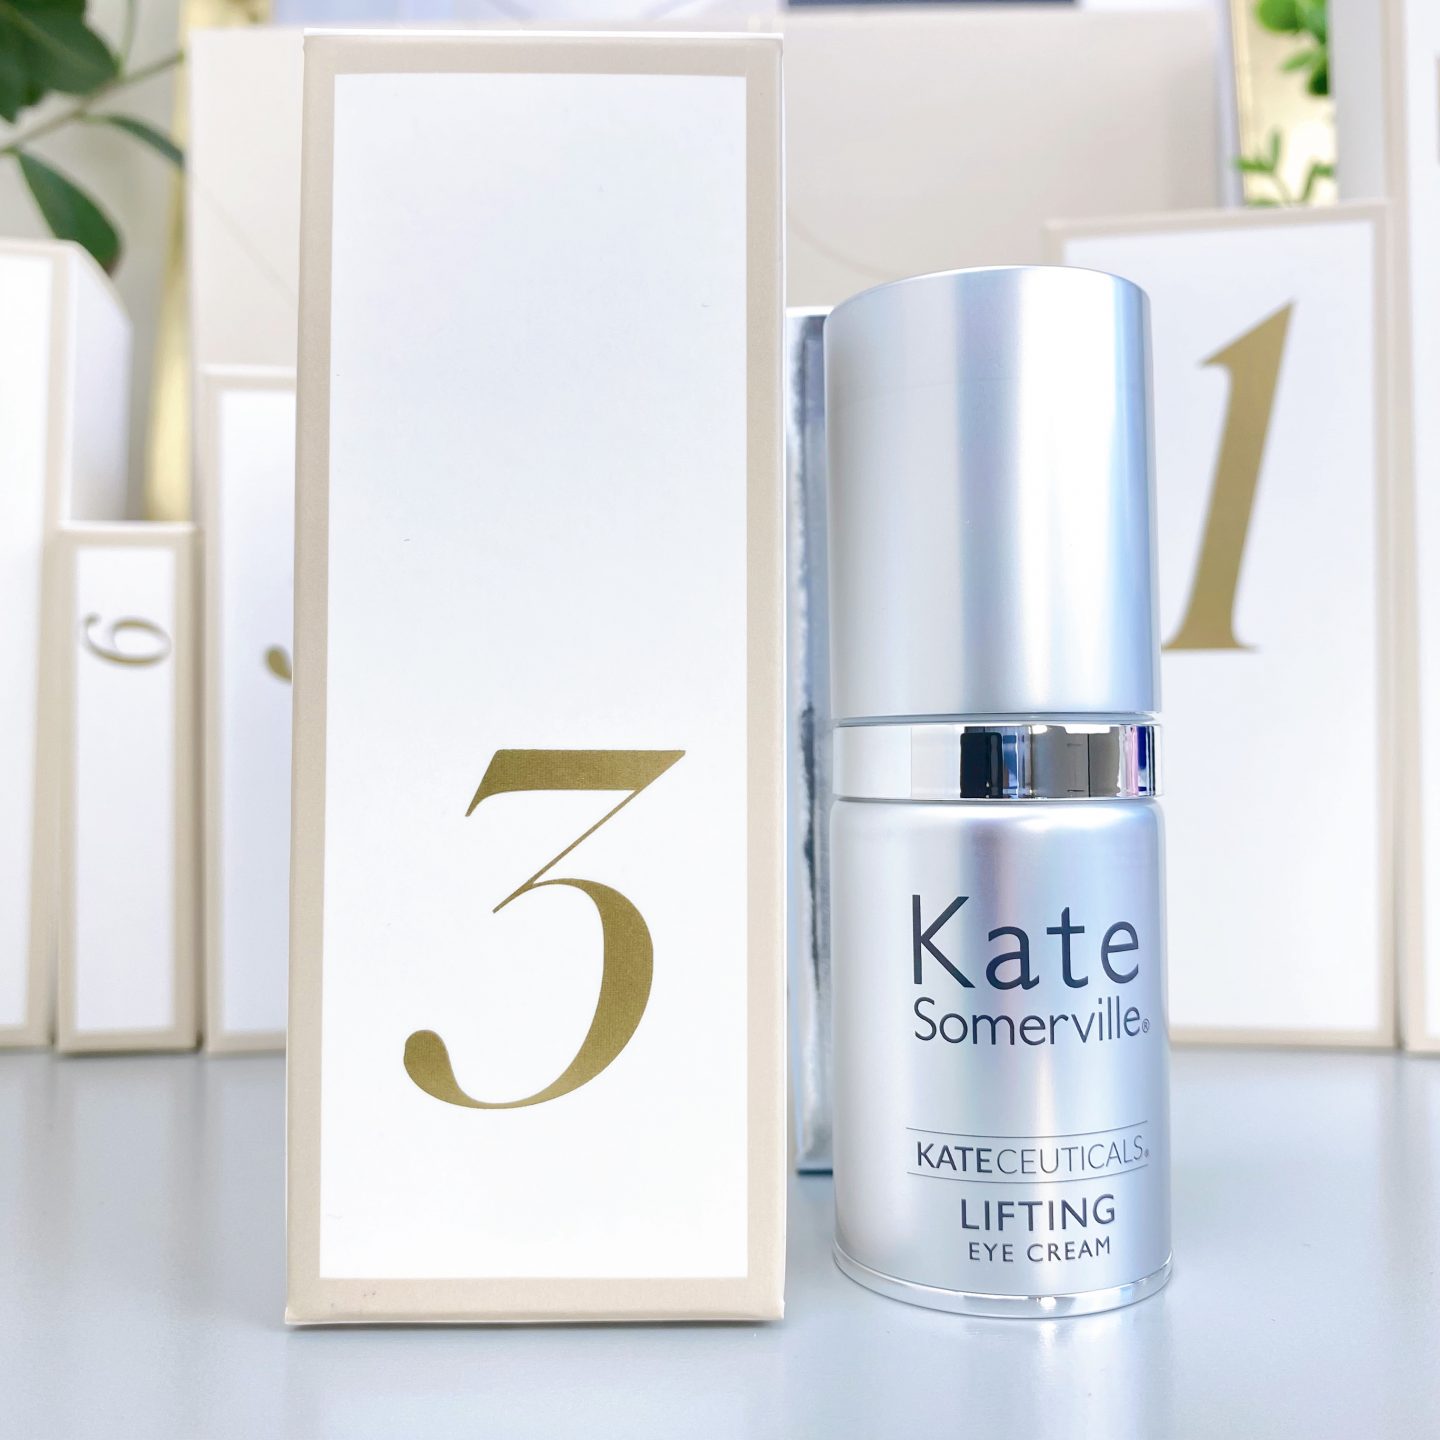 Kate Somerville 12 Days of Kate Advent Calendar Review